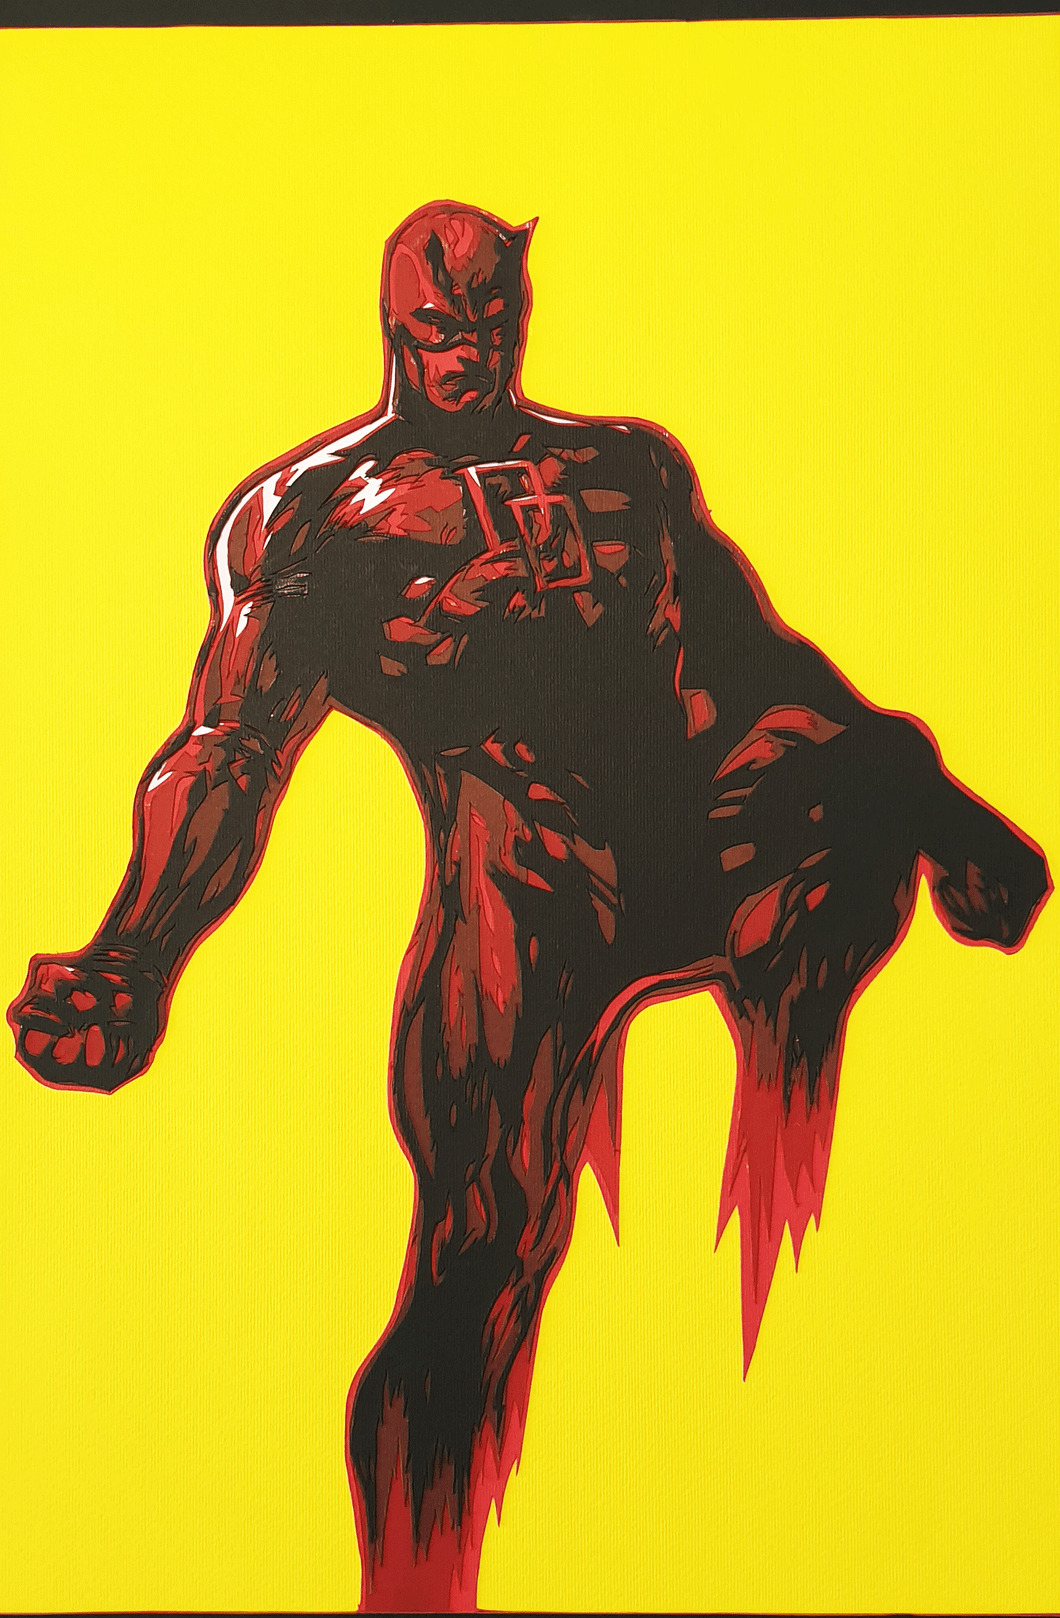 DareDevil by Rick Sharif - FRAMED [A3 Size (297 x 420 mm) (11.7 x 16.5 in) in a FRAME]